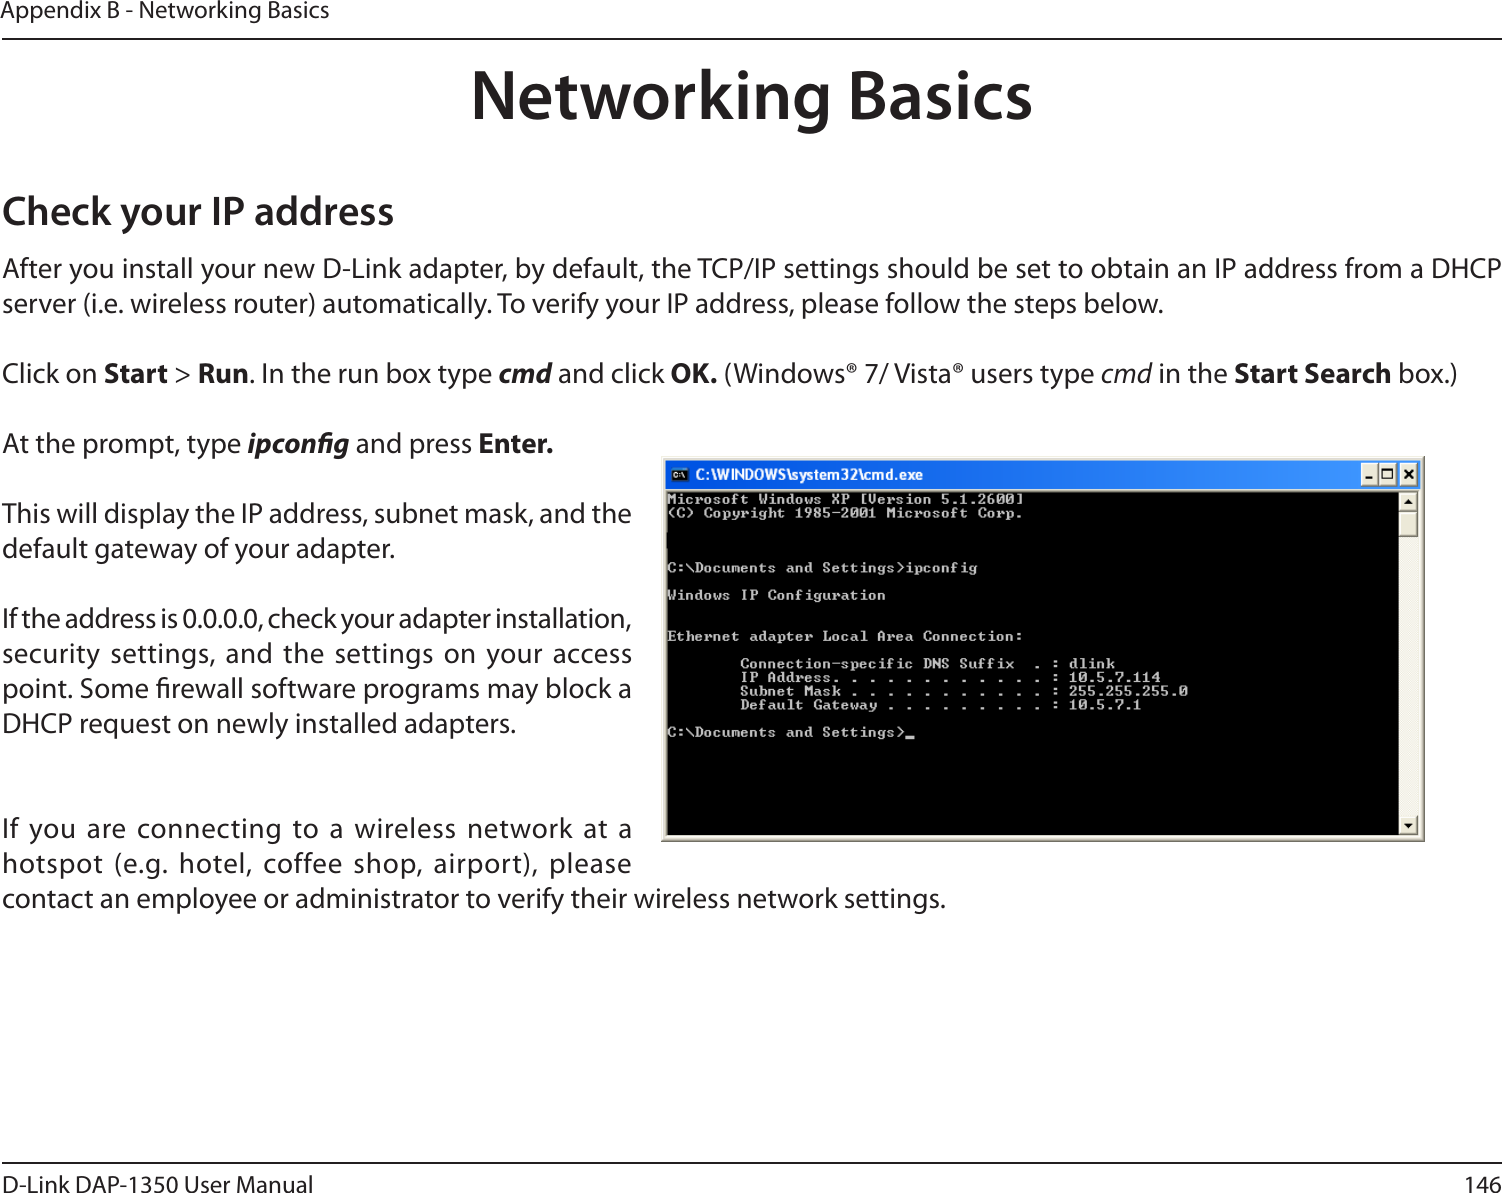 146D-Link DAP-1350 User ManualAppendix B - Networking BasicsNetworking BasicsCheck your IP addressAfter you install your new D-Link adapter, by default, the TCP/IP settings should be set to obtain an IP address from a DHCP server (i.e. wireless router) automatically. To verify your IP address, please follow the steps below.Click on Start &gt; Run. In the run box type cmd and click OK. (Windows® 7/ Vista® users type cmd in the Start Search box.)At the prompt, type ipcong and press Enter.This will display the IP address, subnet mask, and the default gateway of your adapter.If the address is 0.0.0.0, check your adapter installation, security  settings,  and  the  settings on your  access point. Some rewall software programs may block a DHCP request on newly installed adapters. If you are connecting  to a wireless network at a hotspot (e.g. hotel, coffee shop, airport), please contact an employee or administrator to verify their wireless network settings.